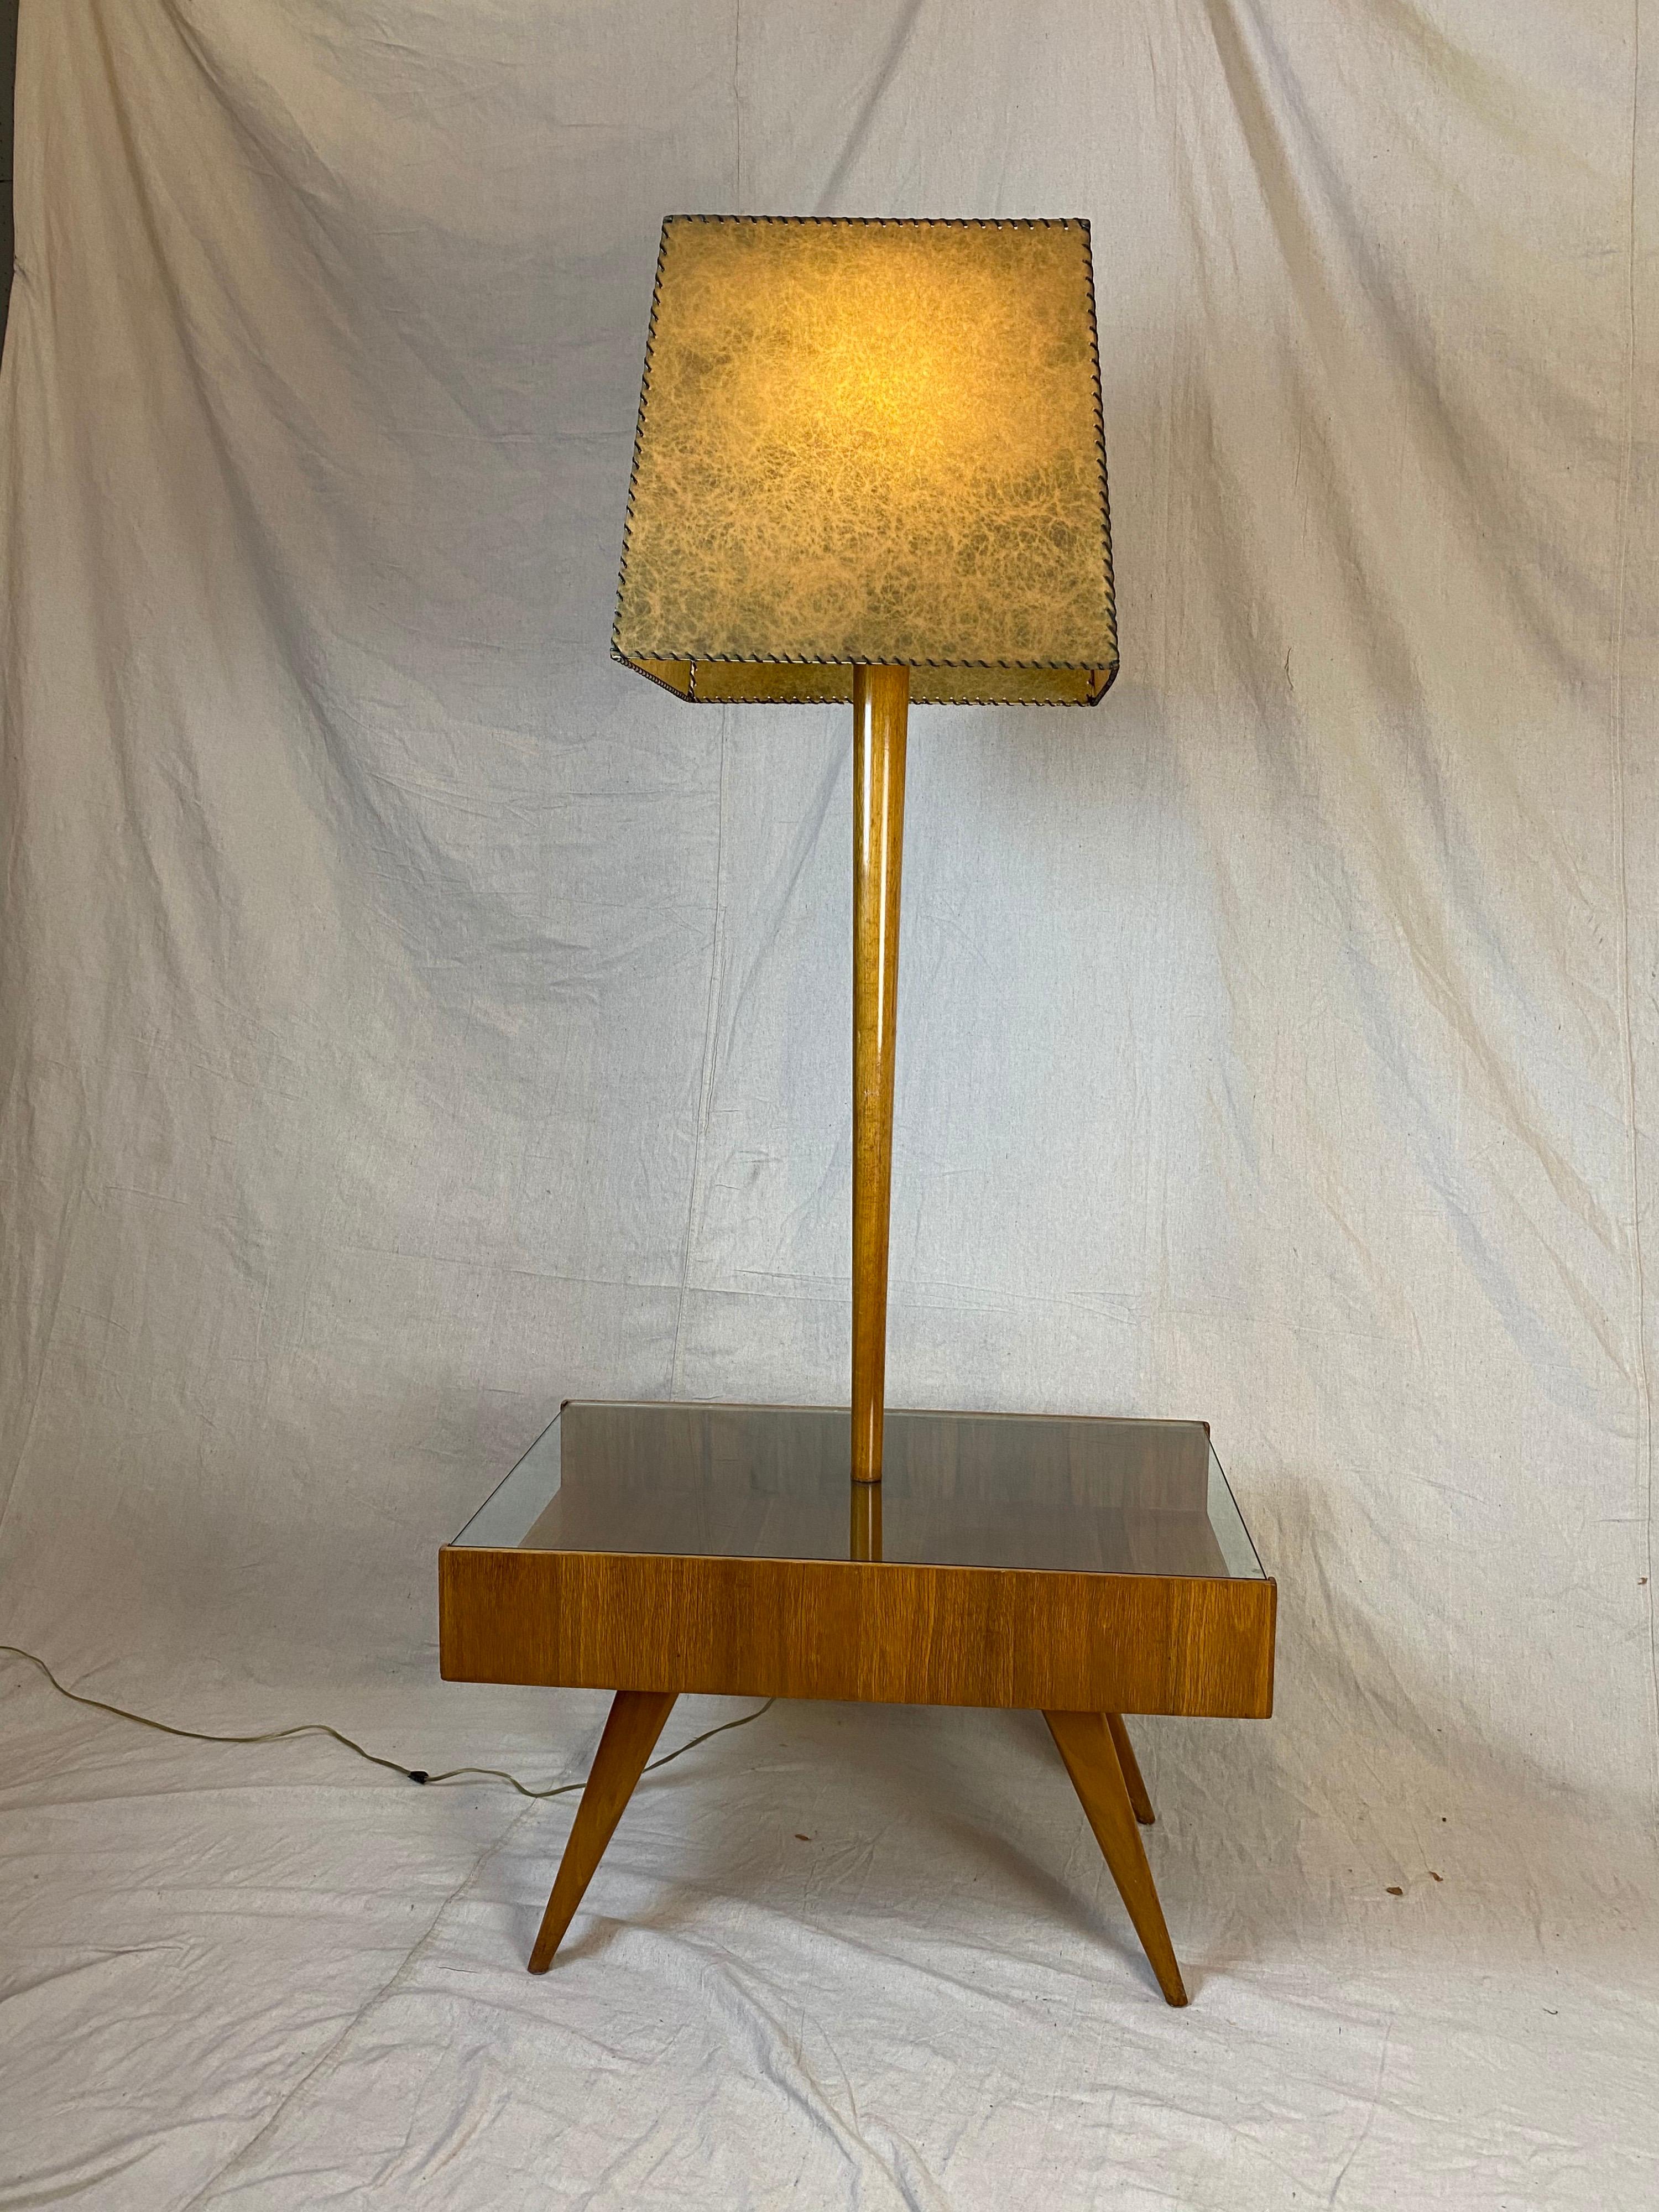 Vladimir Kagan for Kagan Dreyfuss table/ floor lamp. Table has a glass top that allows for Storage of books and Magazines. Splayed tapered legs support the cabinet. Commissioned in 1954 for a Gentleman's Apartment,  until recently living in its